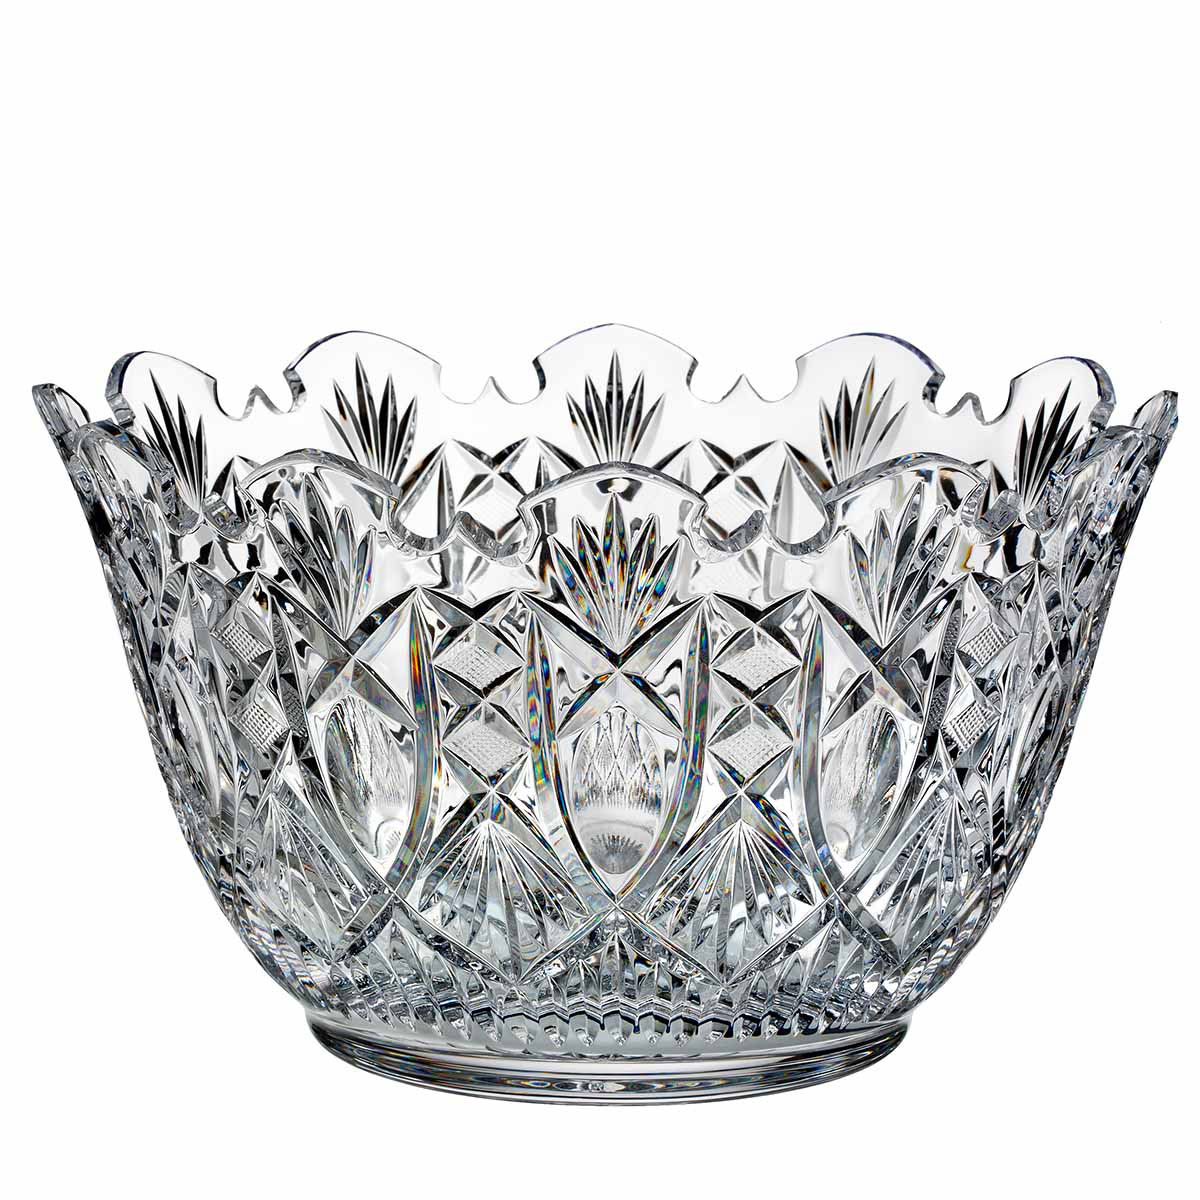 Waterford Crystal, House of Waterford Maritana 12" Crystal Bowl, Limited Edition of 200